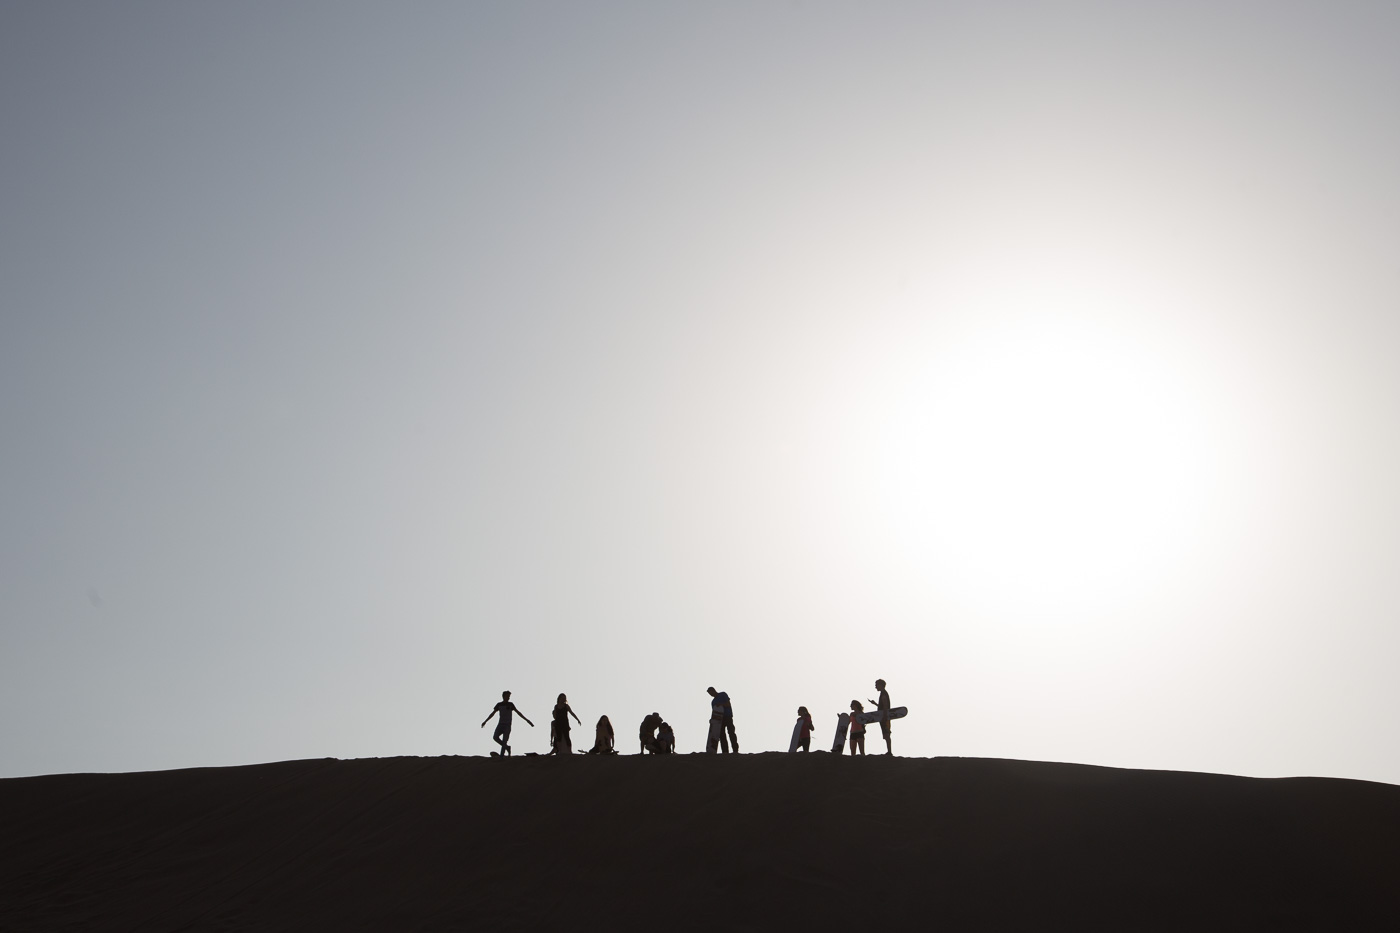 Everyone readies (and does weird poses) before sandboarding the massive dunes of Huacachina.